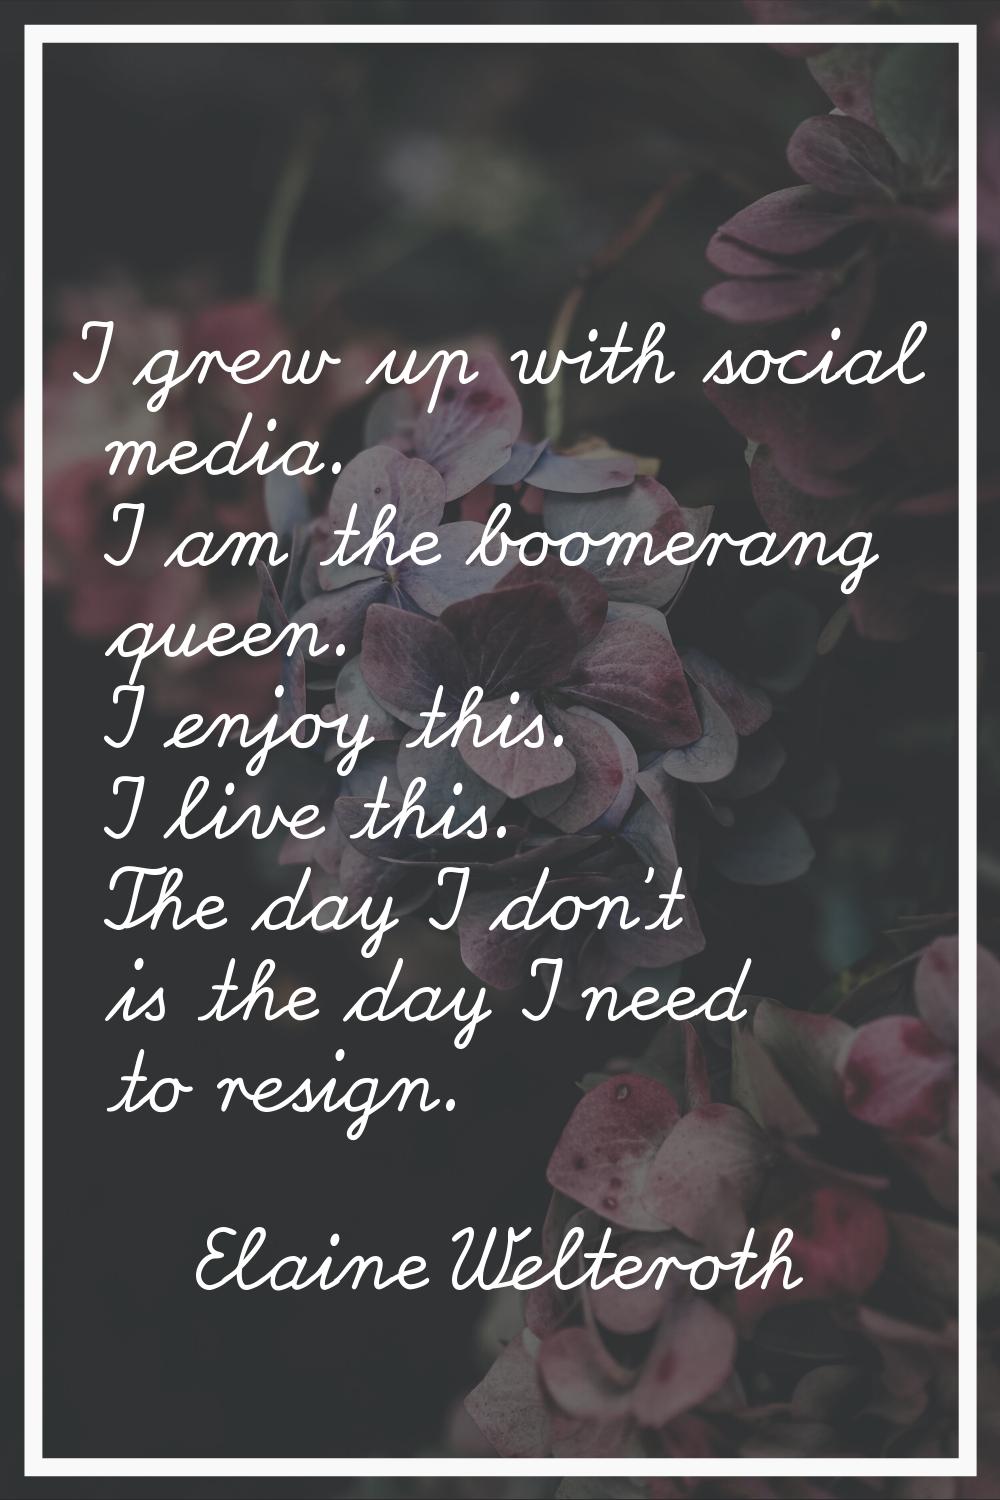 I grew up with social media. I am the boomerang queen. I enjoy this. I live this. The day I don't i